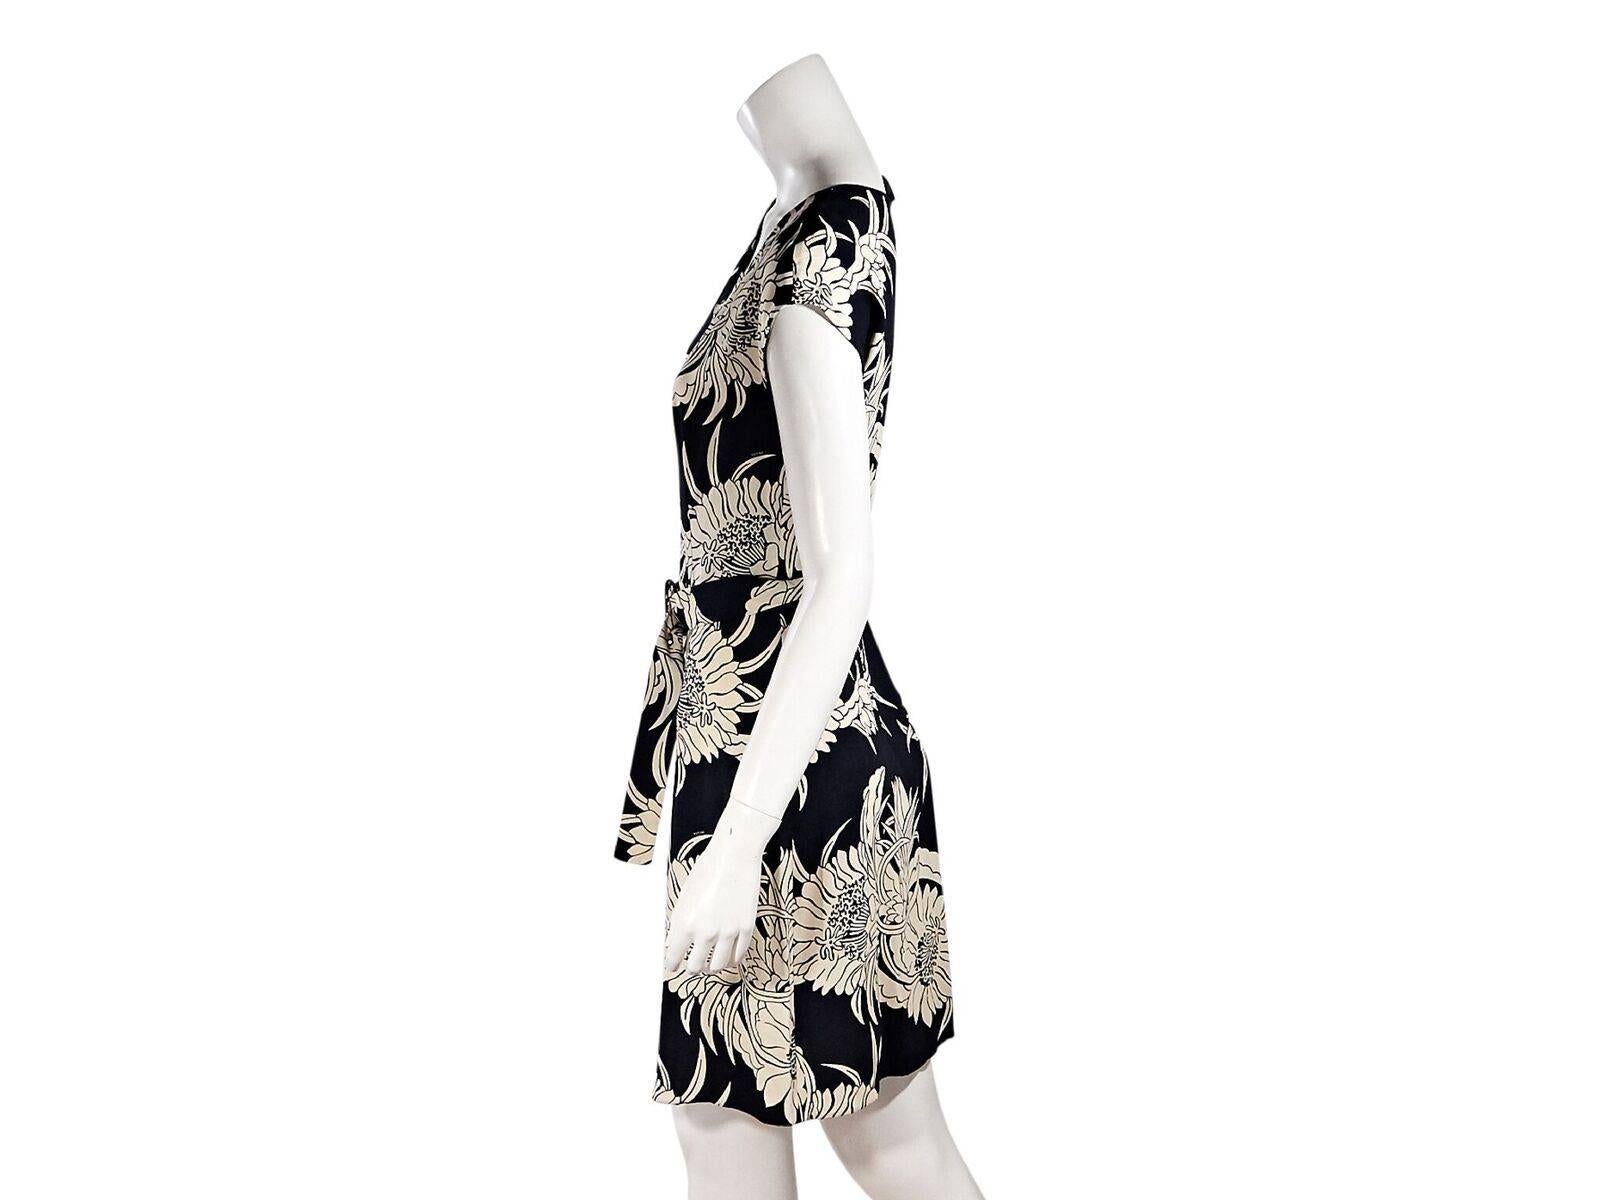 Product details:  Navy blue and white floral-printed jersey dress by Prada.  Deep scoopneck.  Cap sleeves.  Exposed zip-front closure.  Adjustable belted waist.  38